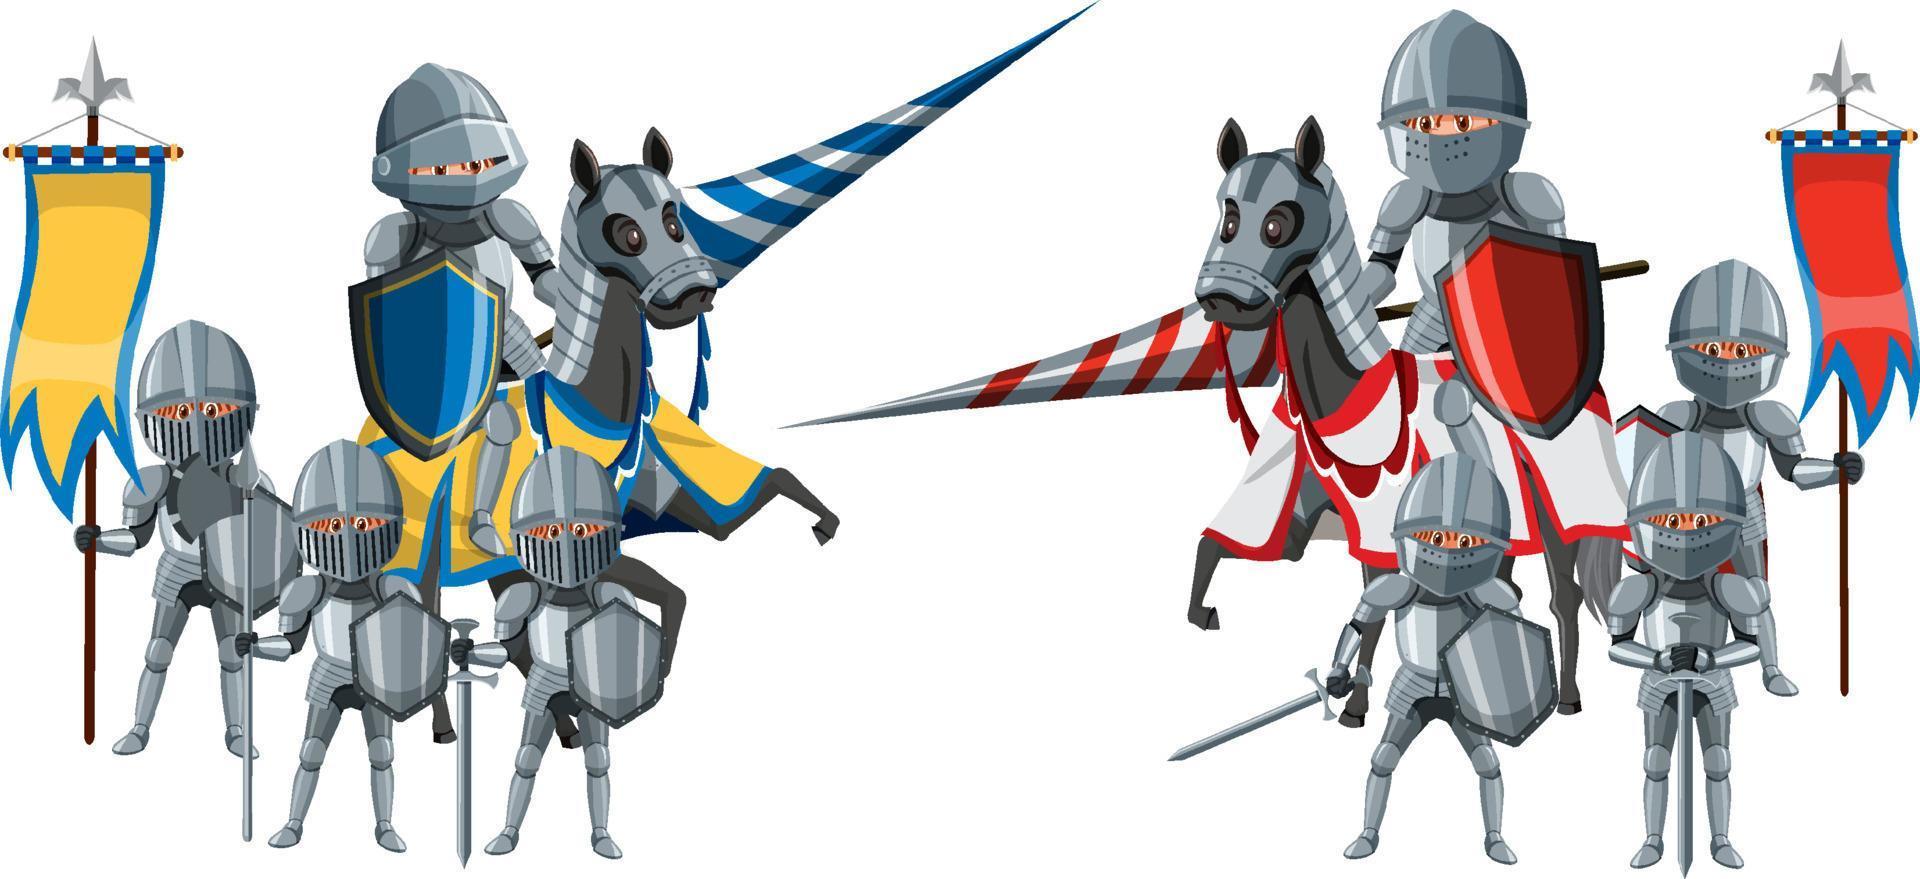 Medieval knight jousting tournament on white background vector